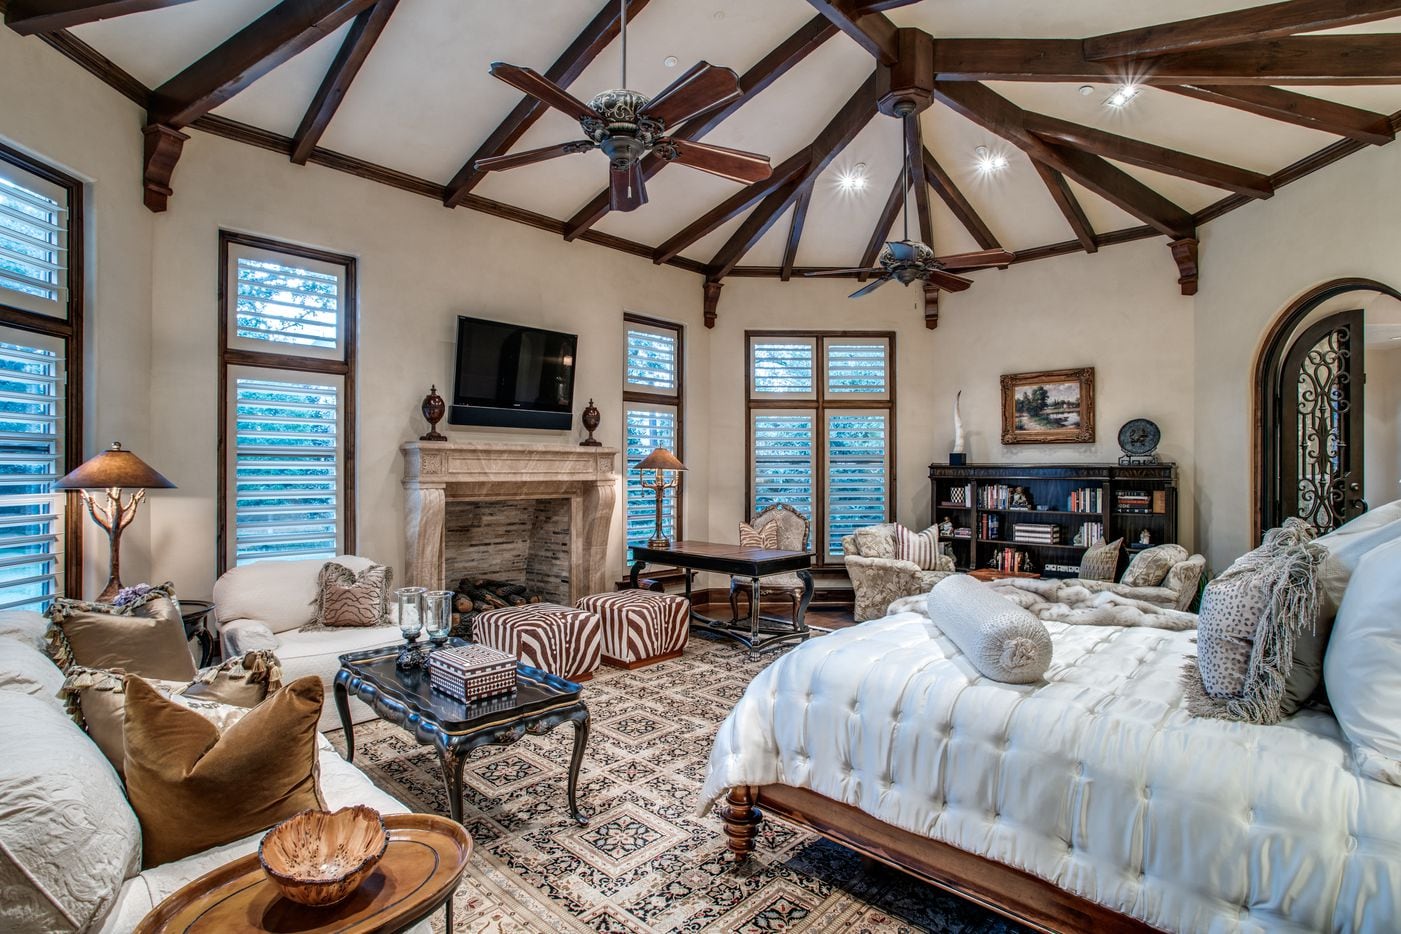 Take a look at the Tuscan style home at 5335 Meaders Lane in Dallas, TX.